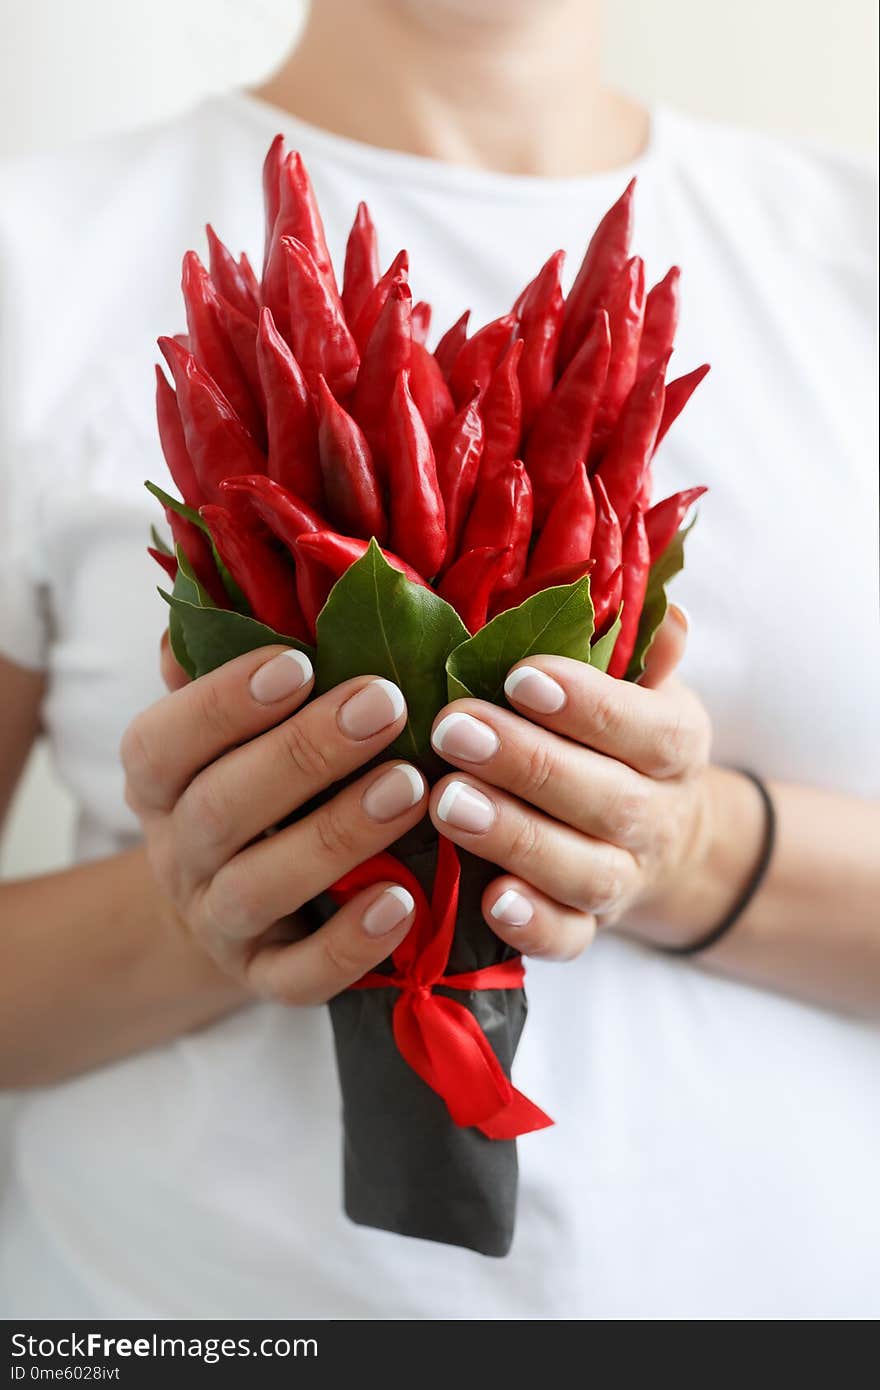 Woman is holding a small bouquet made of red hot peppers in the form of a heart.